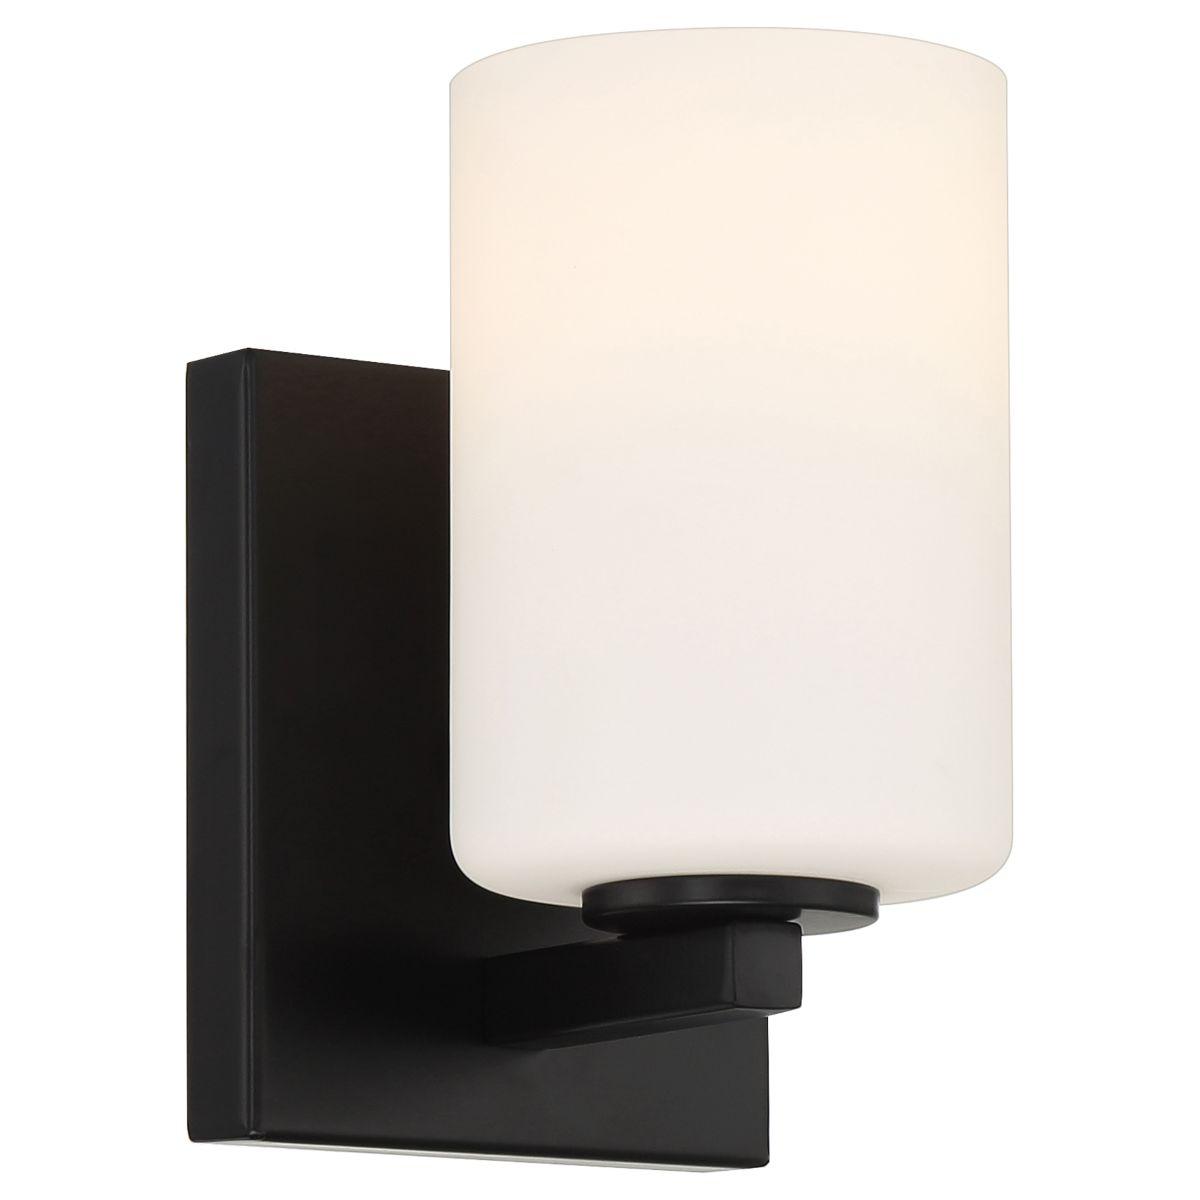 Sienna 7 in. LED Armed Sconce